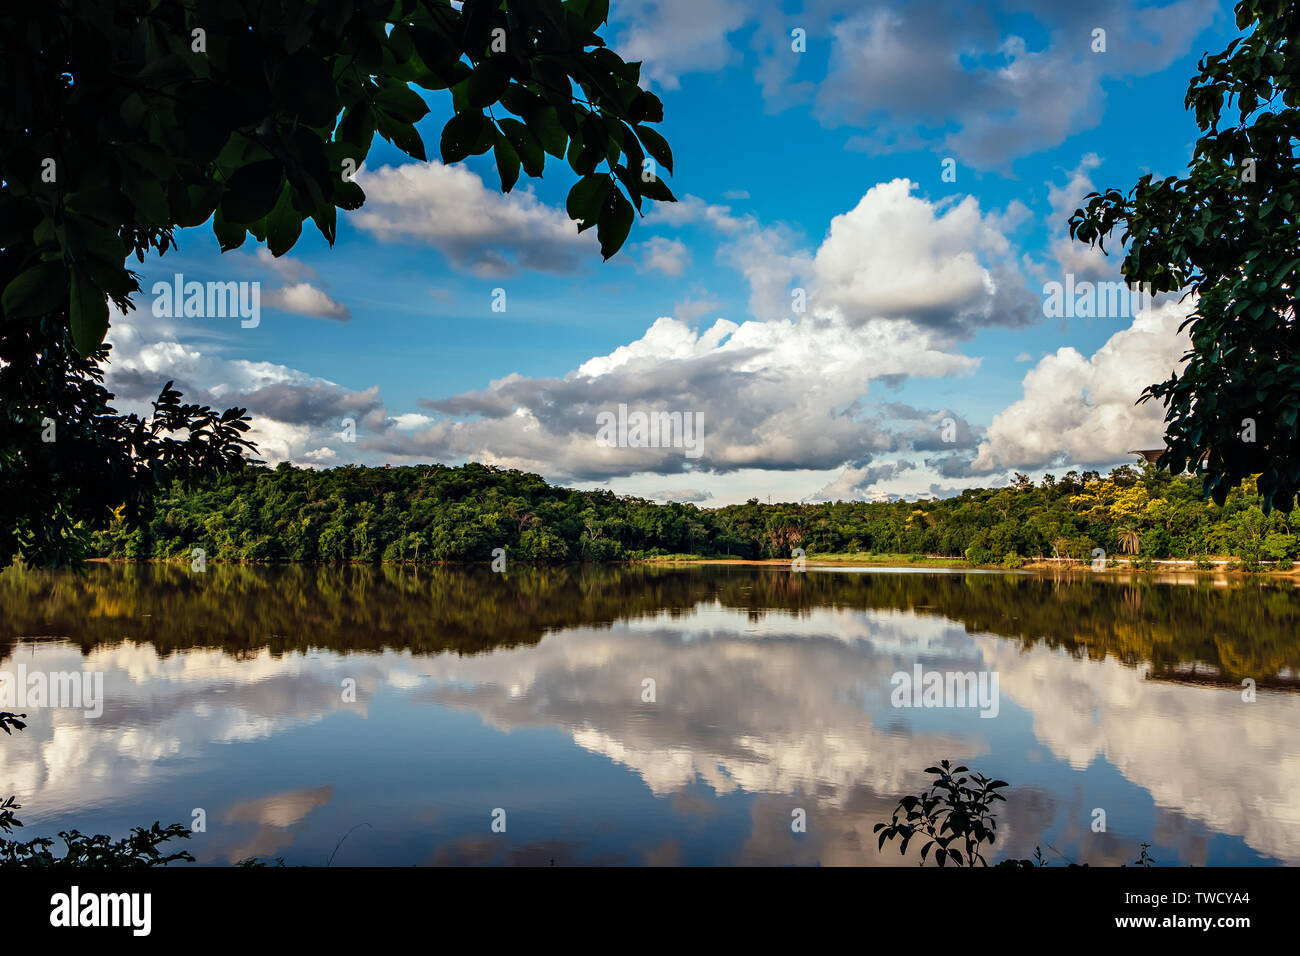 Afternoon time by the lake of Cesamar Park in the city of Palmas, State of Tocantins in Brazil Stock Photo